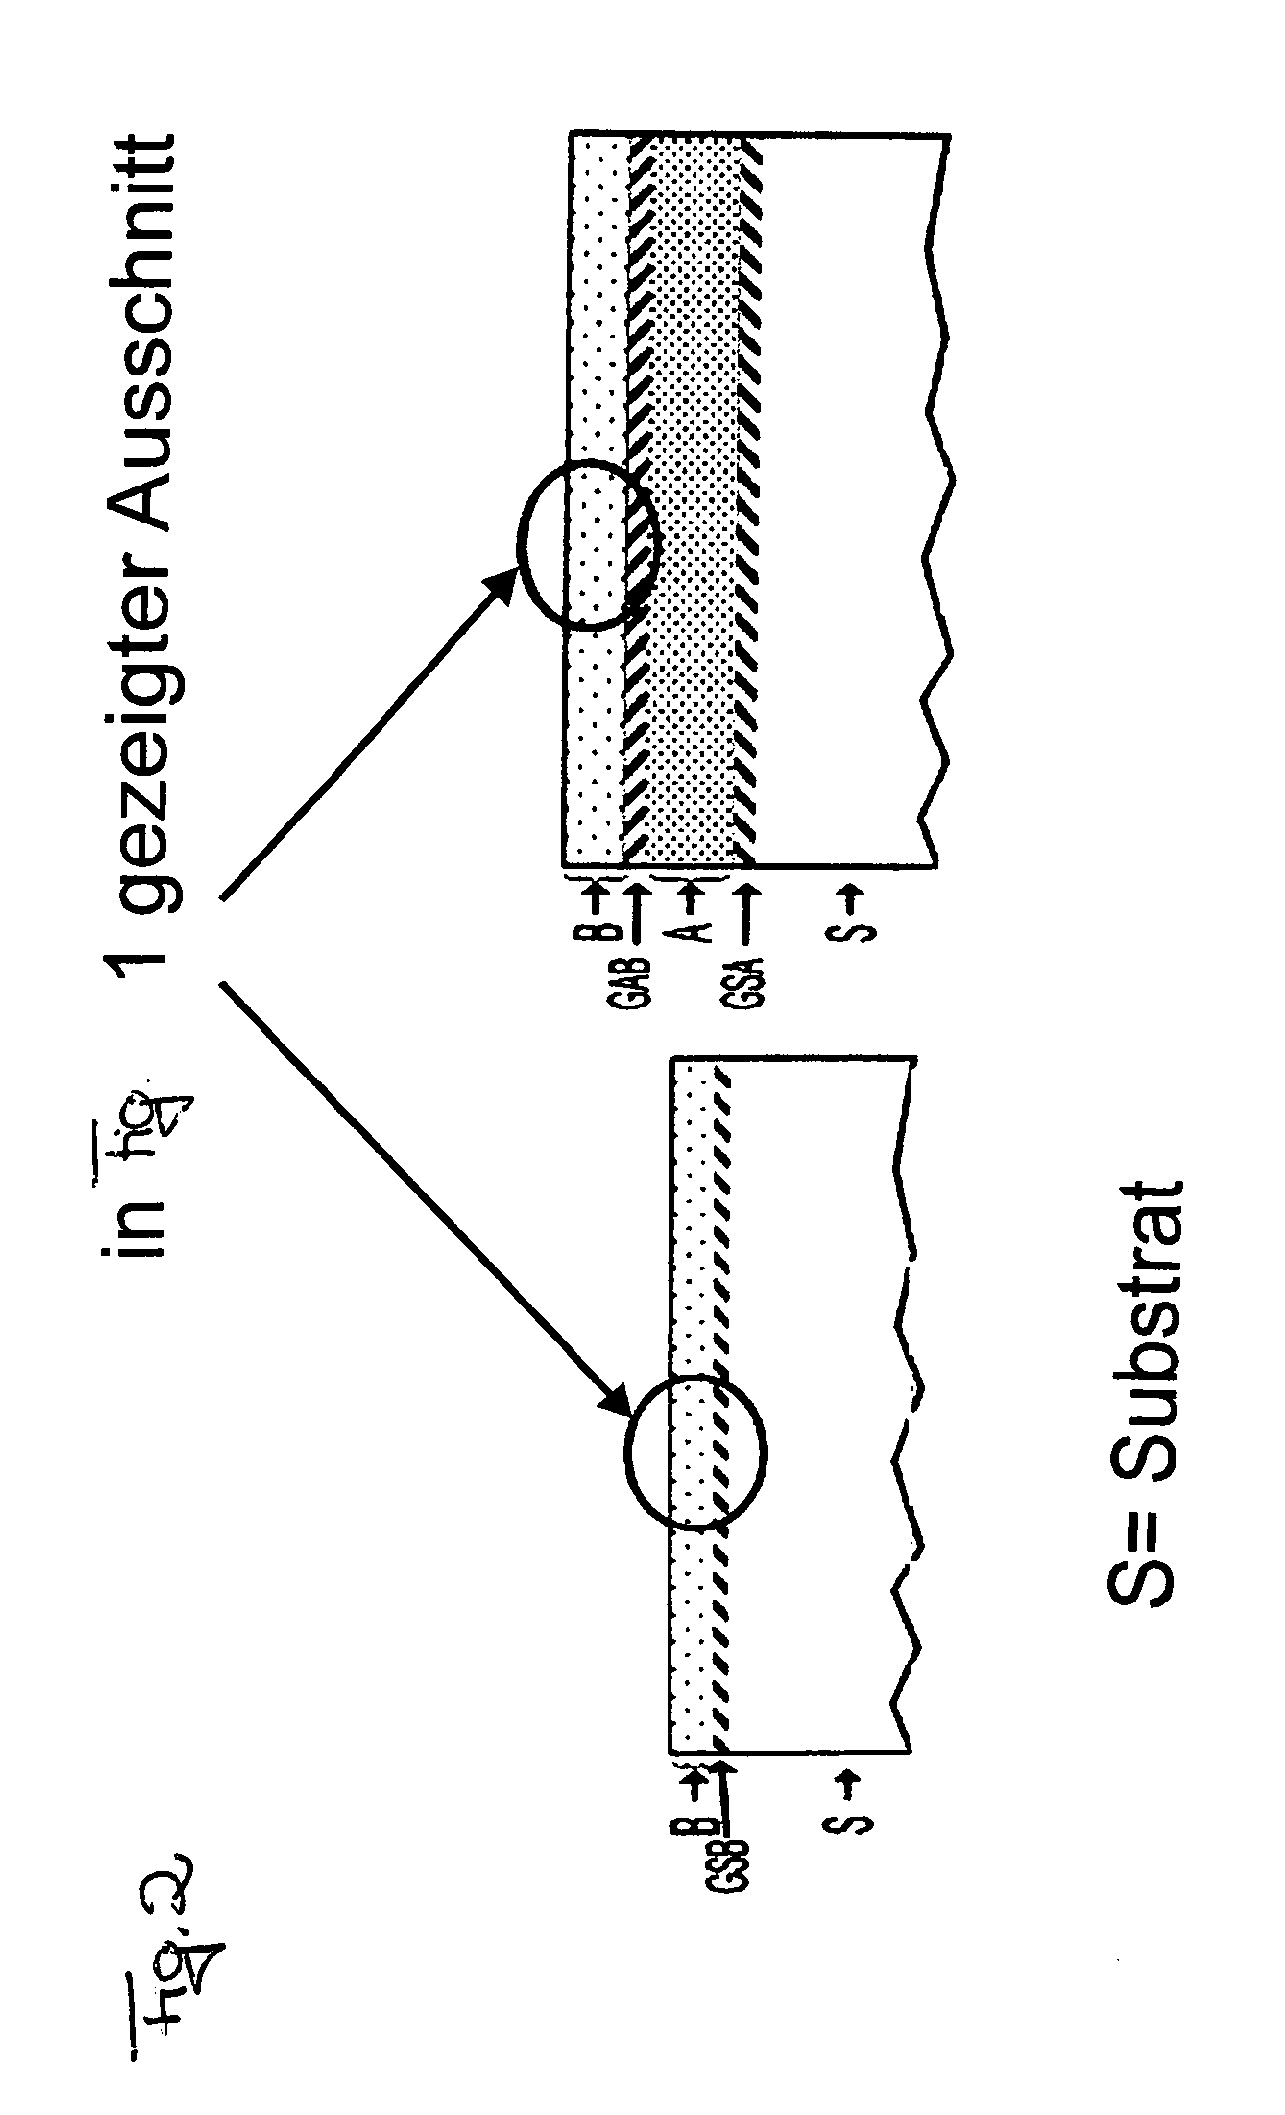 Plasma-Deposited Electrically Insulating, Diffusion-Resistant and Elastic Layer System